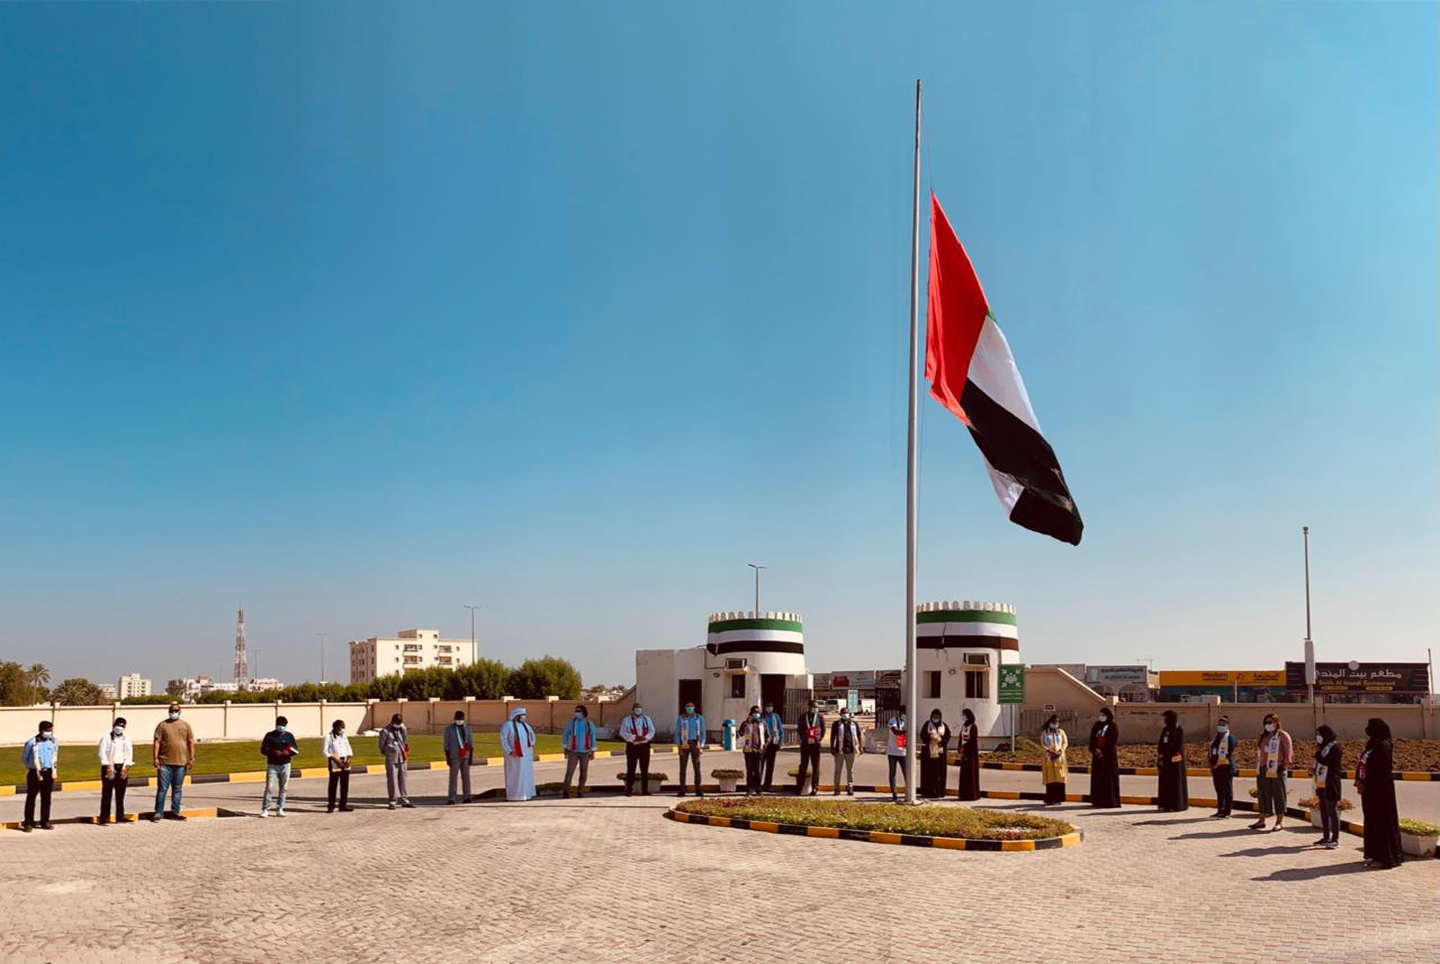 Umm Al Quwain Broadcasting Network celebrated the Flag Day 3rd November 2020. Employees of all nationalities gathered to participate in the celebration of the national occasion of the UAE.